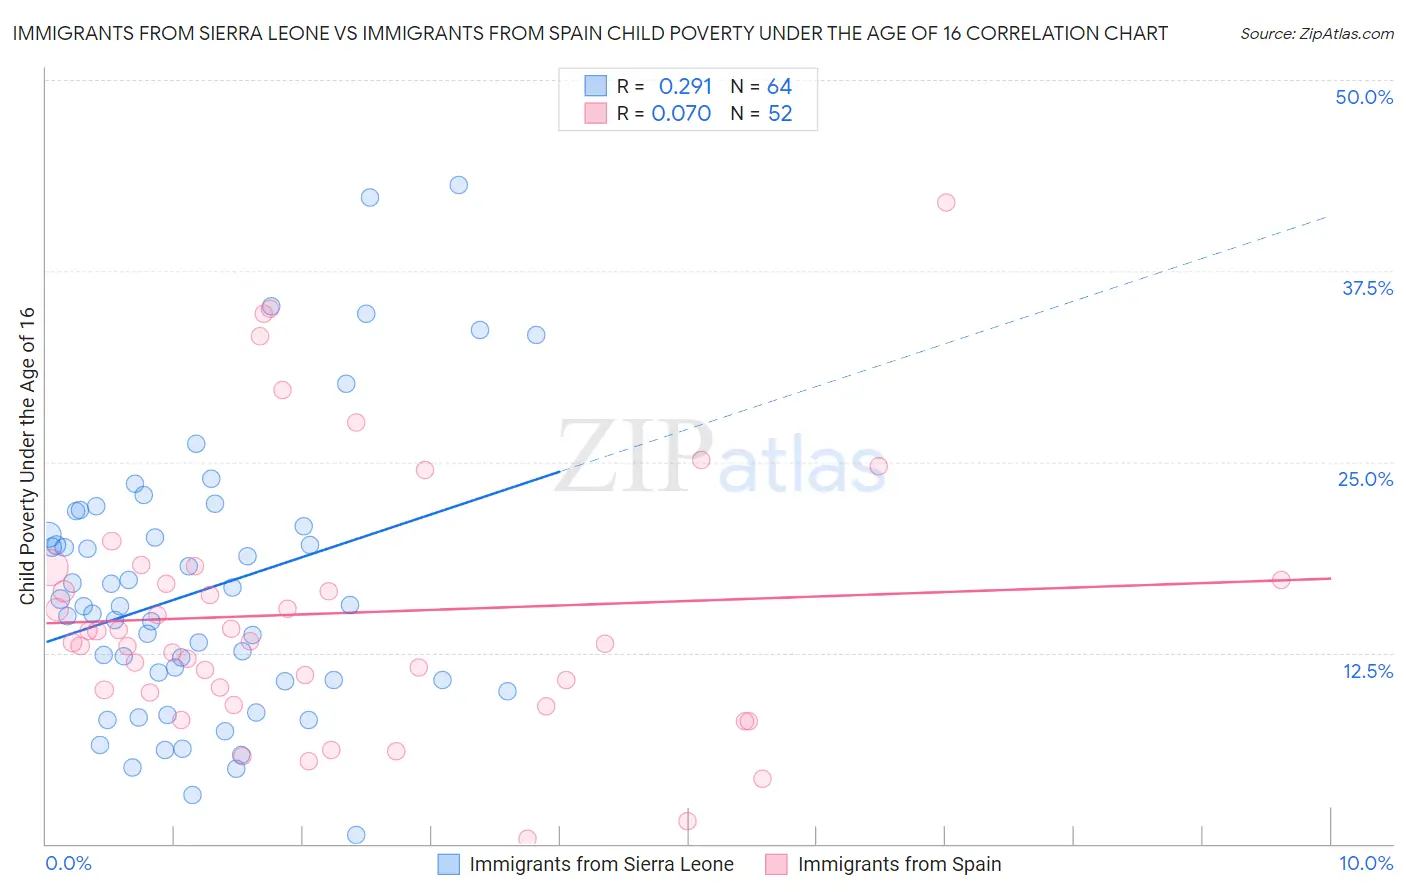 Immigrants from Sierra Leone vs Immigrants from Spain Child Poverty Under the Age of 16